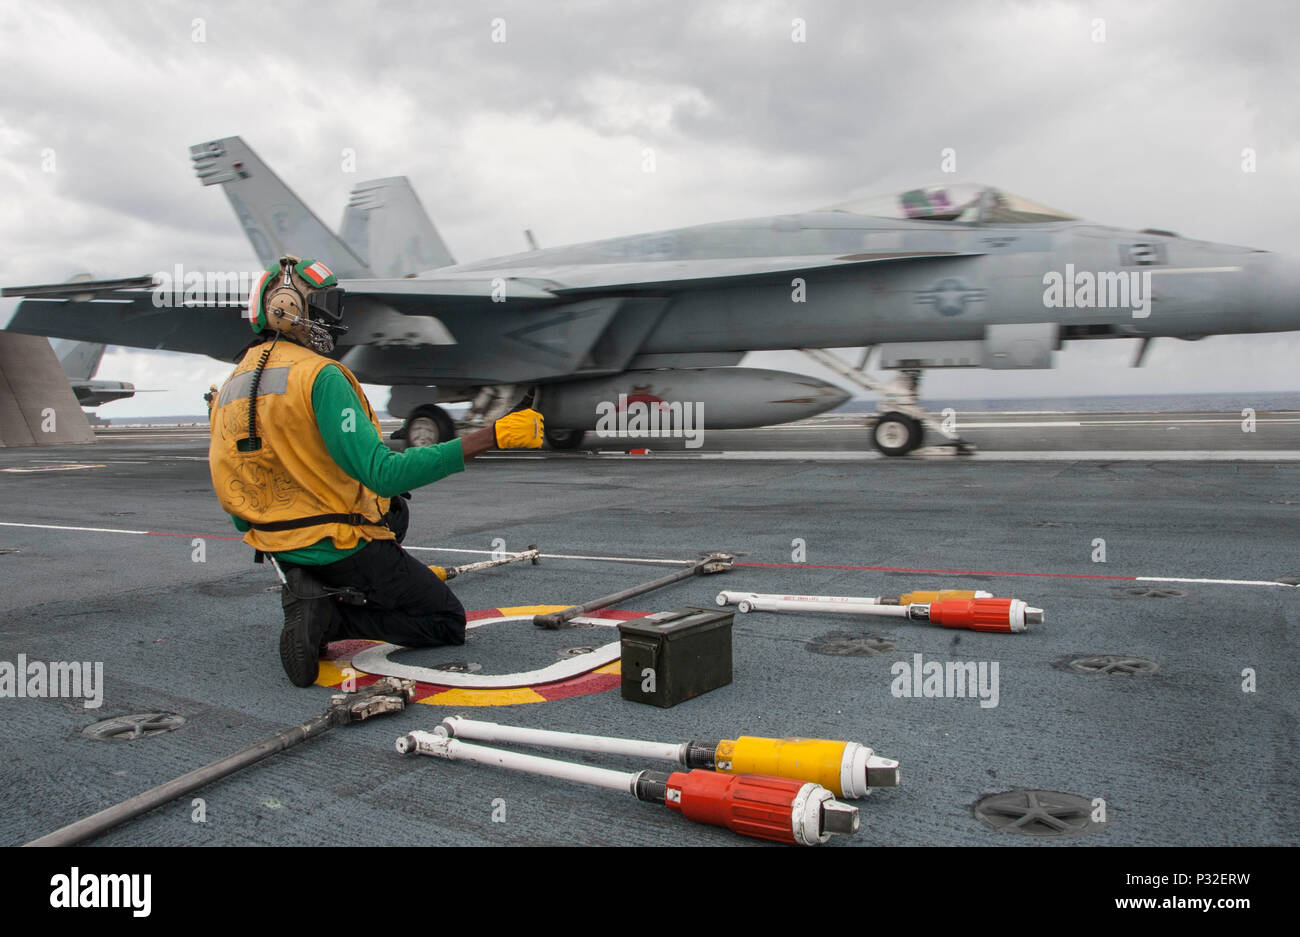 160824-N-XI307-160 ATLANTIC OCEAN (Aug. 24, 2016) Aviation Boatswain's Mate (Equipment) 2nd Class Jene Maxwell gives a thumbs up  during the launch of an F/A-18D Super Hornet attached to the 'Gladiators' of Strike Fighter Squadron (VFA) 106 on the fight deck of the aircraft carrier USS George H.W. Bush (CVN 77). GHWB is underway conducting training and qualifications in preparation for a 2017 deployment. (U.S. Navy photo by Mass Communication Specialist 2nd Class Ryan Seelbach/Released) Stock Photo